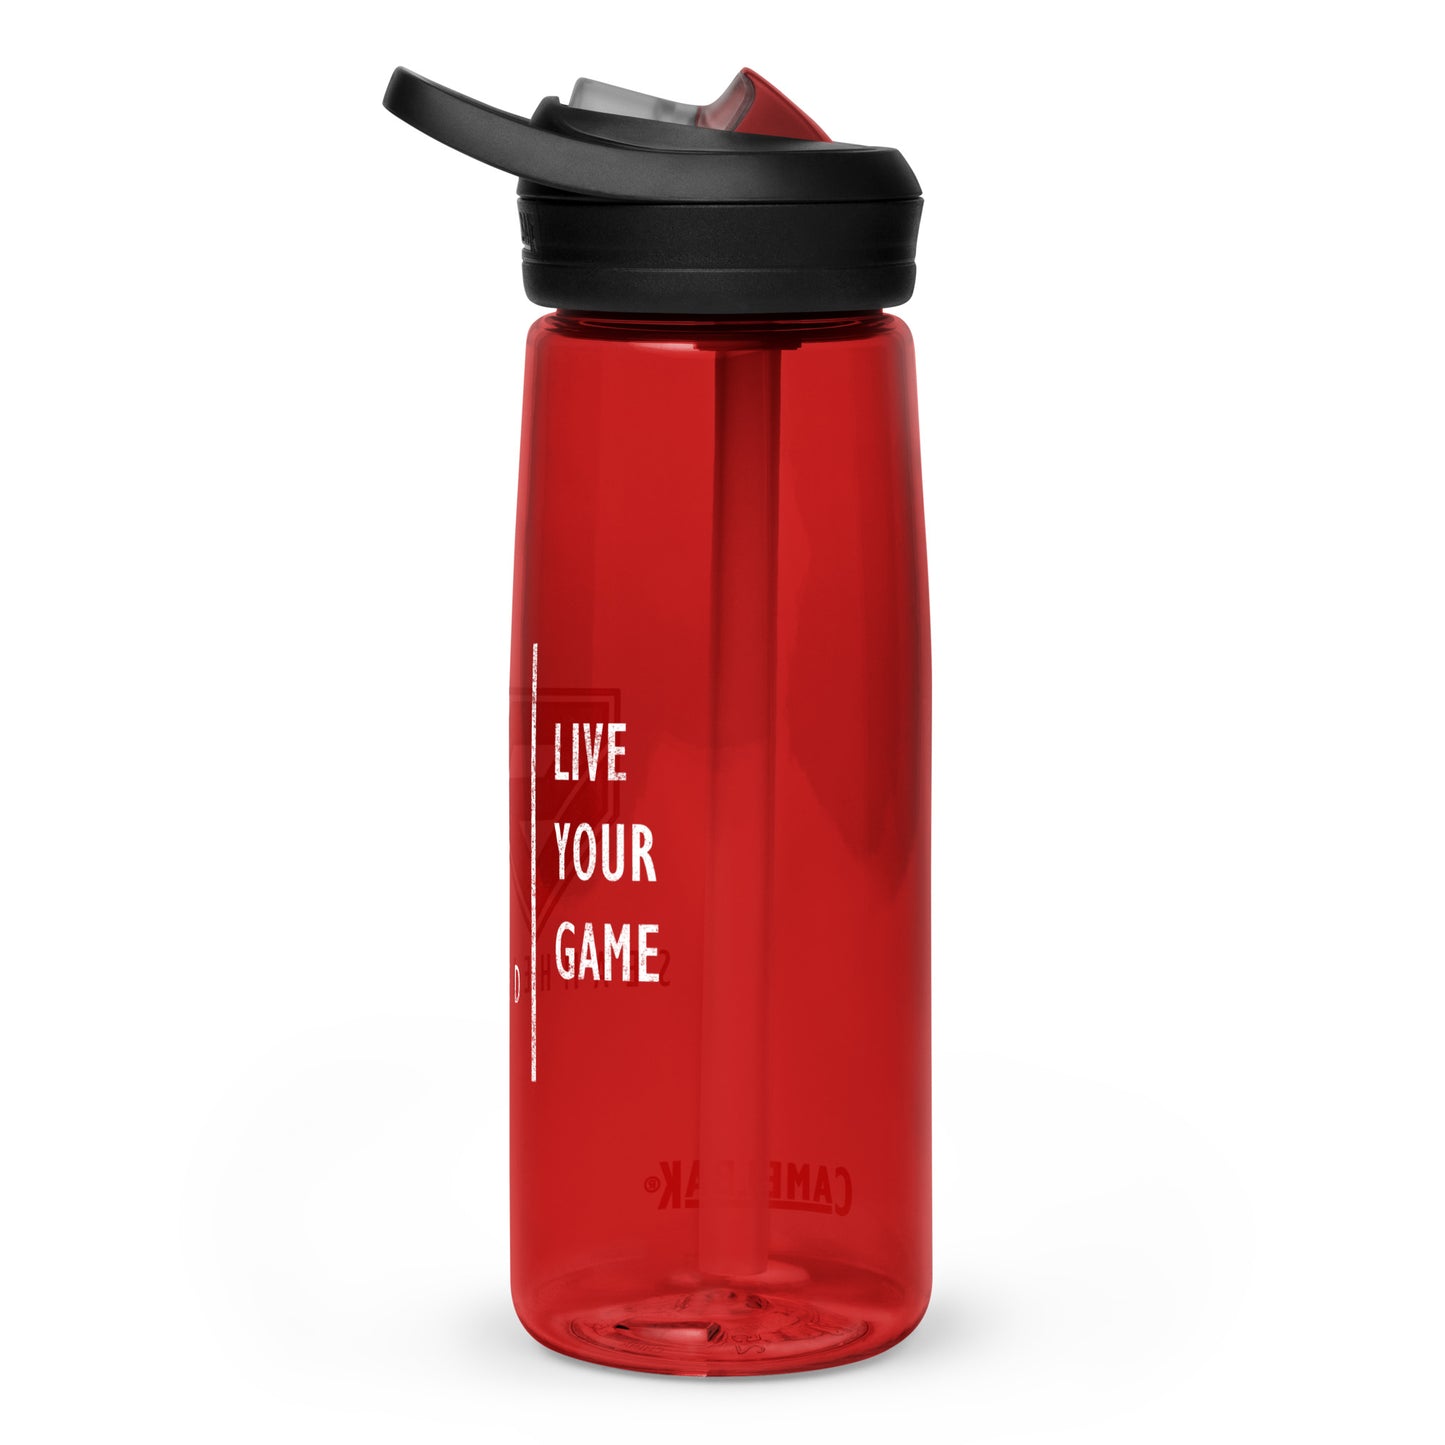 Live Your Game Sports Bottle from Seamheaded Apparel